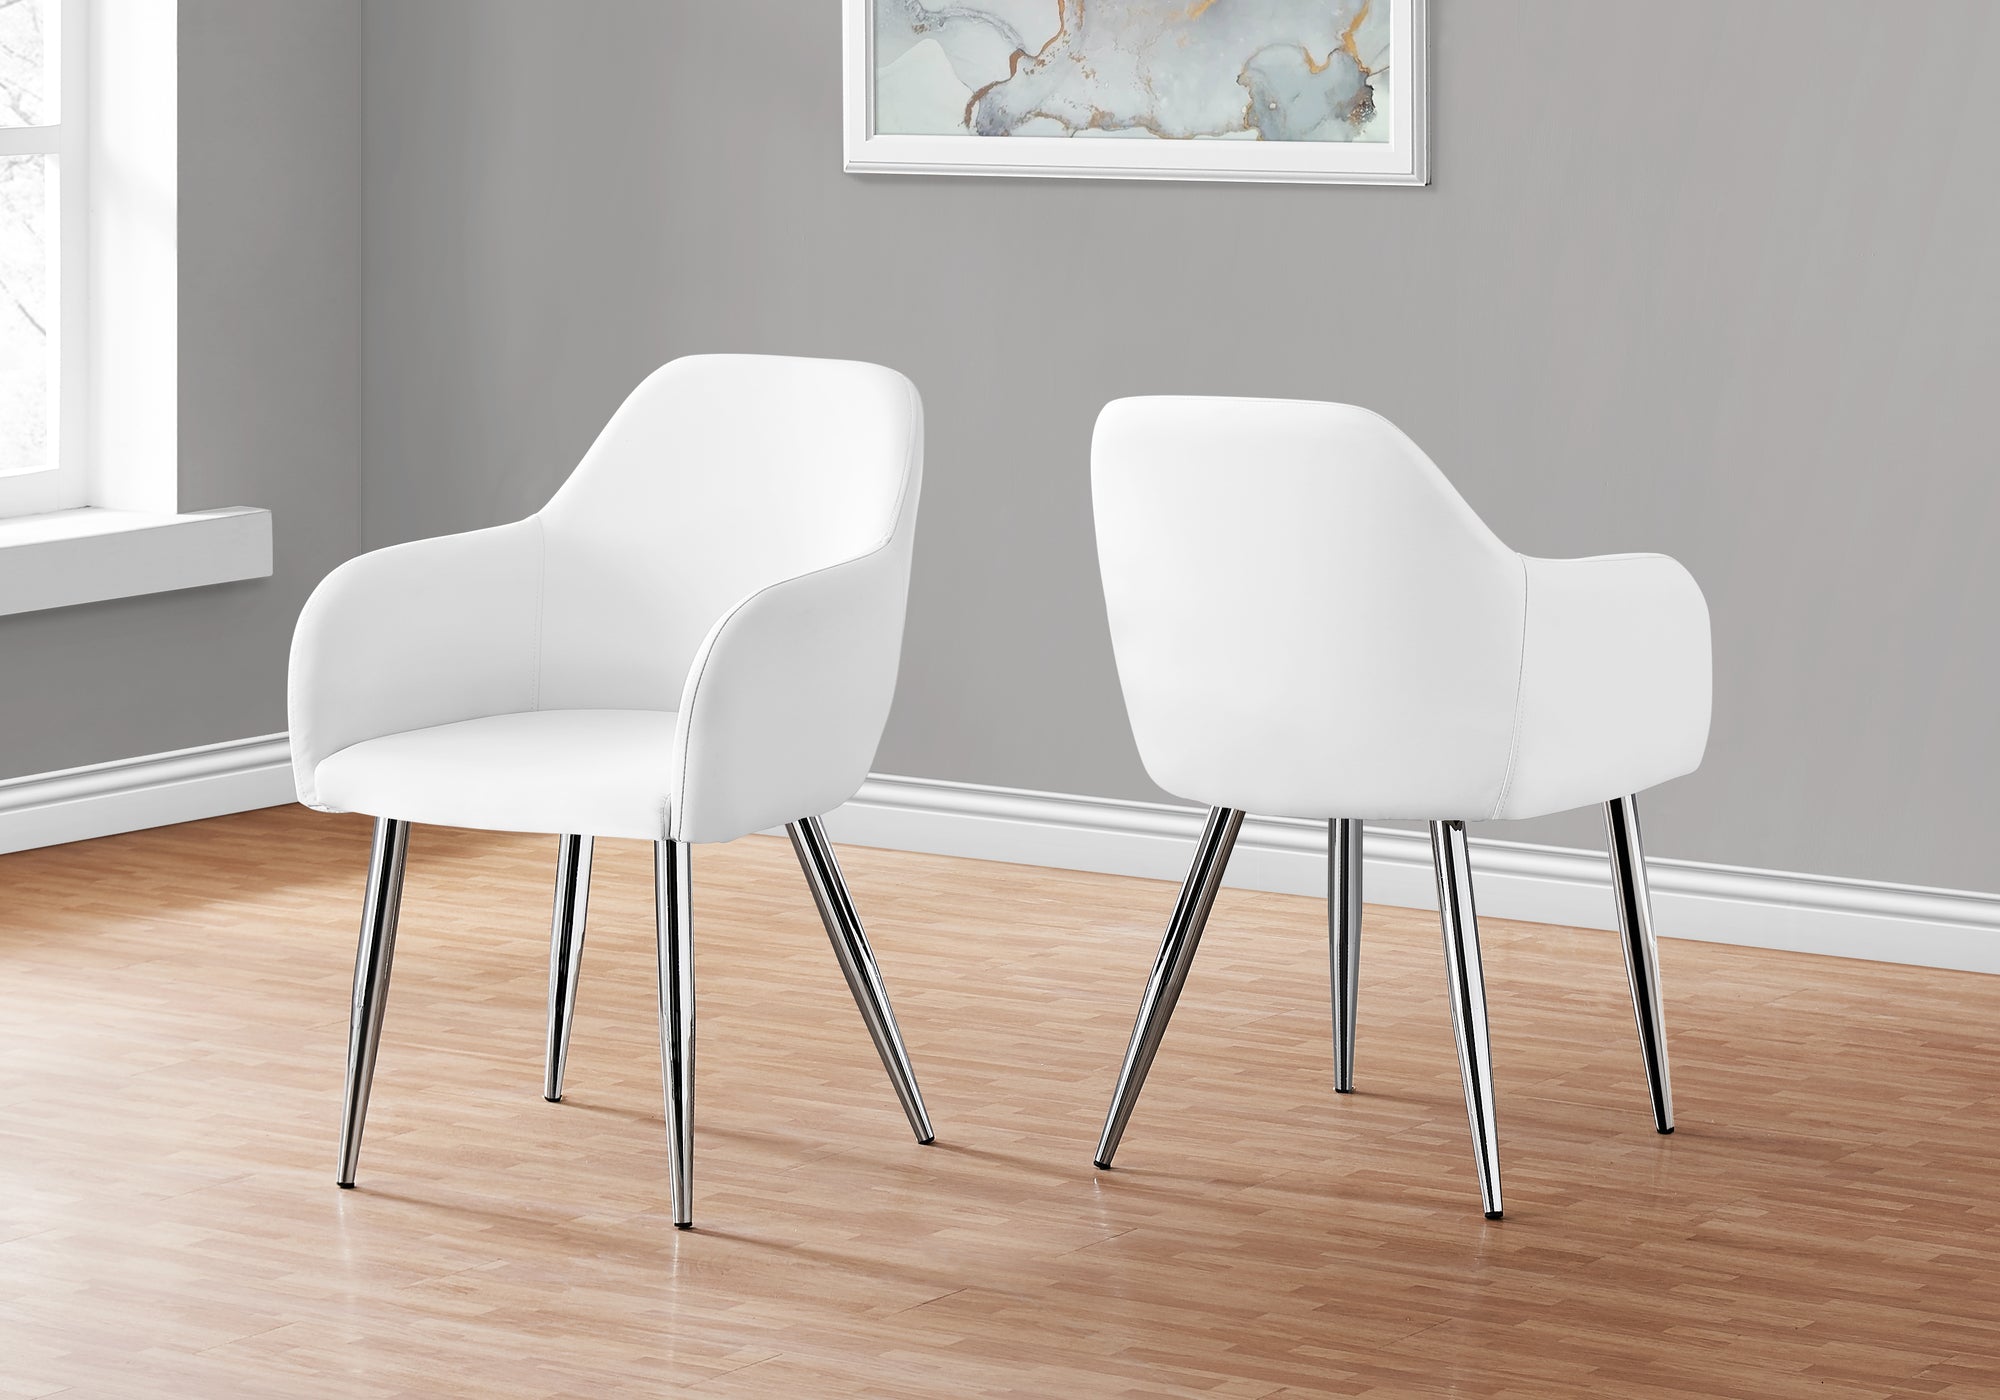 I 1190 - DINING CHAIR - 2PCS / 33"H / WHITE LEATHER-LOOK / CHROME BY MONARCH SPECIALTIES INC